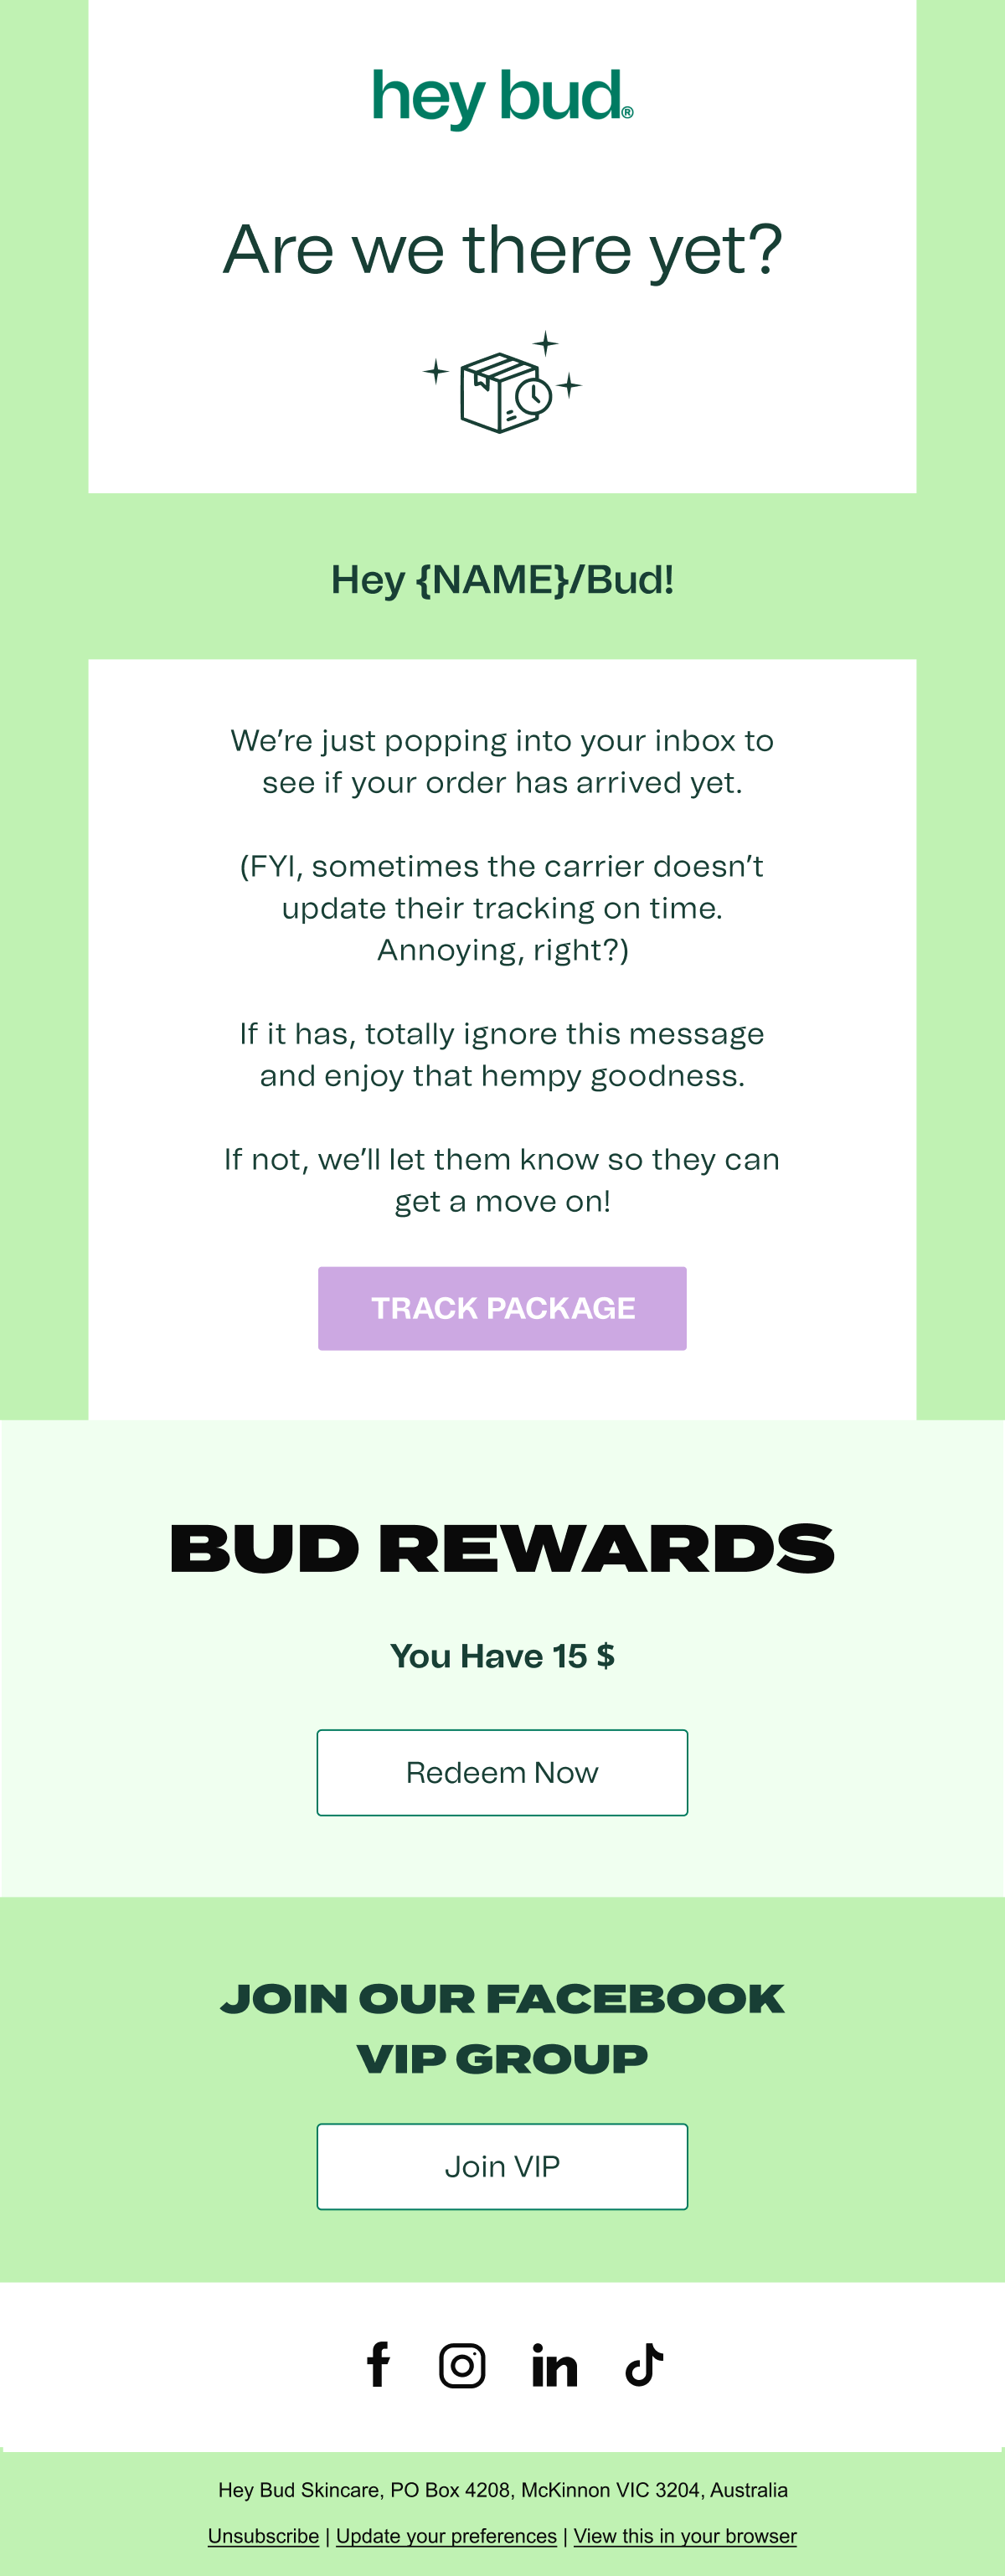 Hey Bud Order Confirmation Industry Email Template screenshot